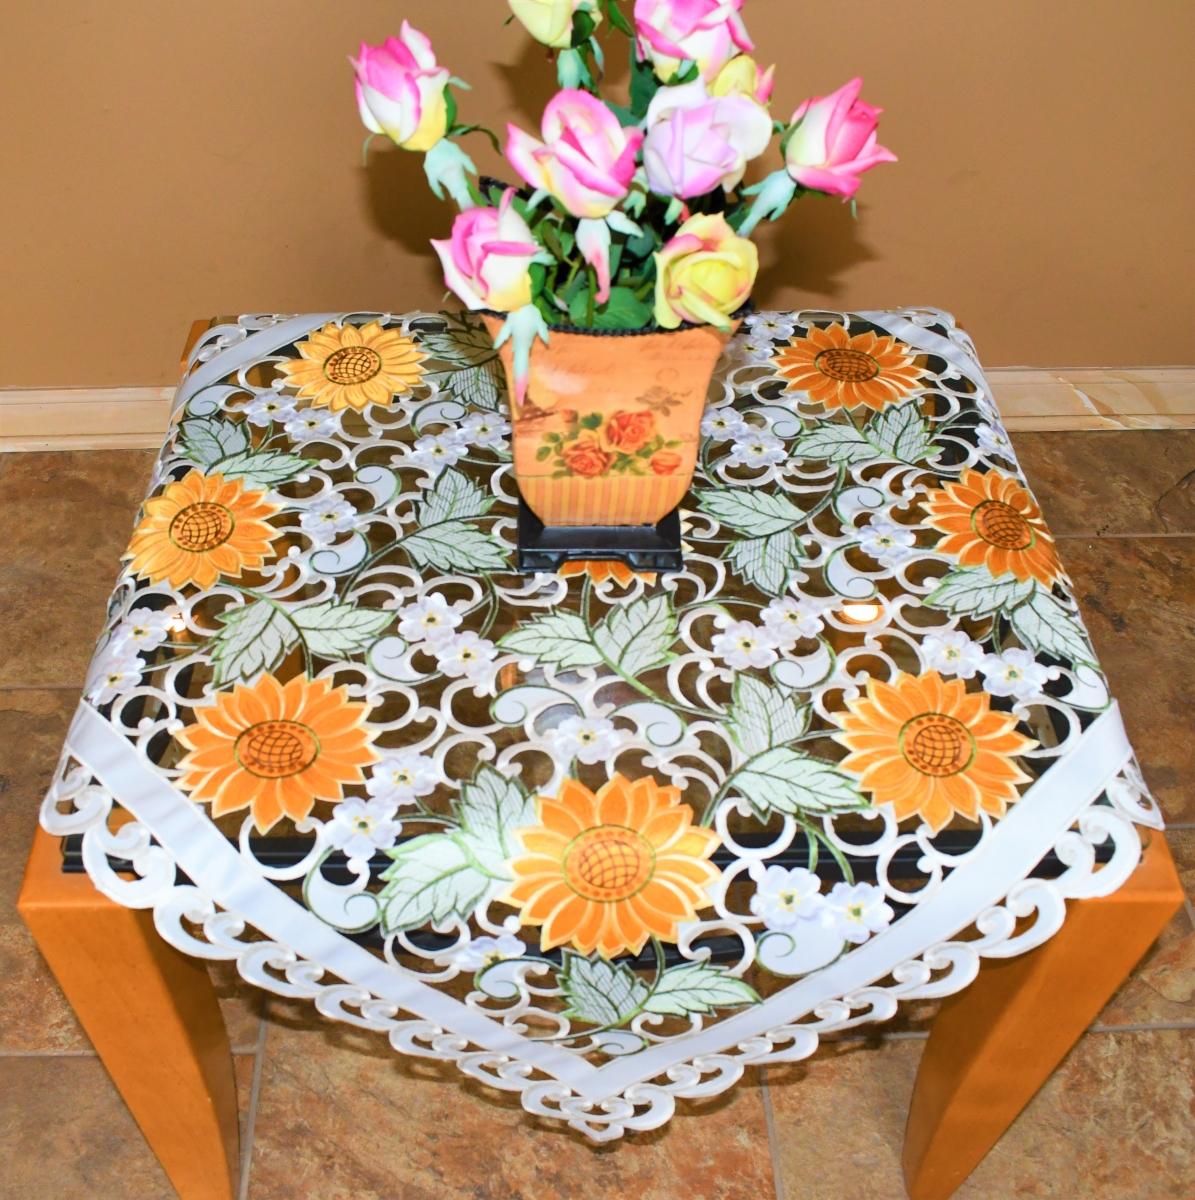 Picture of Sinobrite H8710-42x42SQ 42 x 42 in. Sunflower on Cream Fabric Square Table Topper